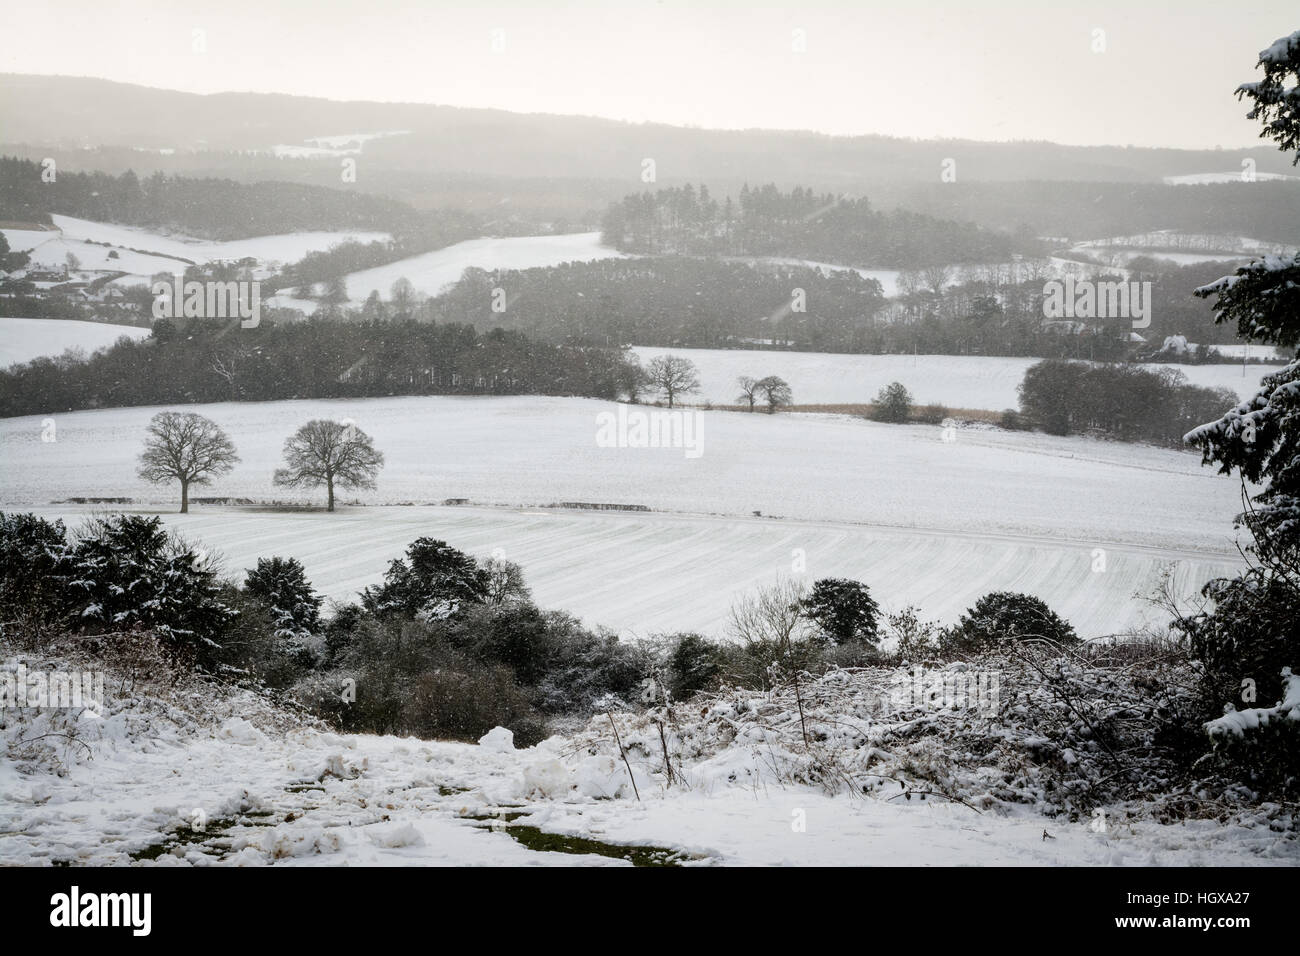 Snowy scenery at Newlands Corner in the Surrey Hills Area of Outstanding Natural Beauty, UK Stock Photo